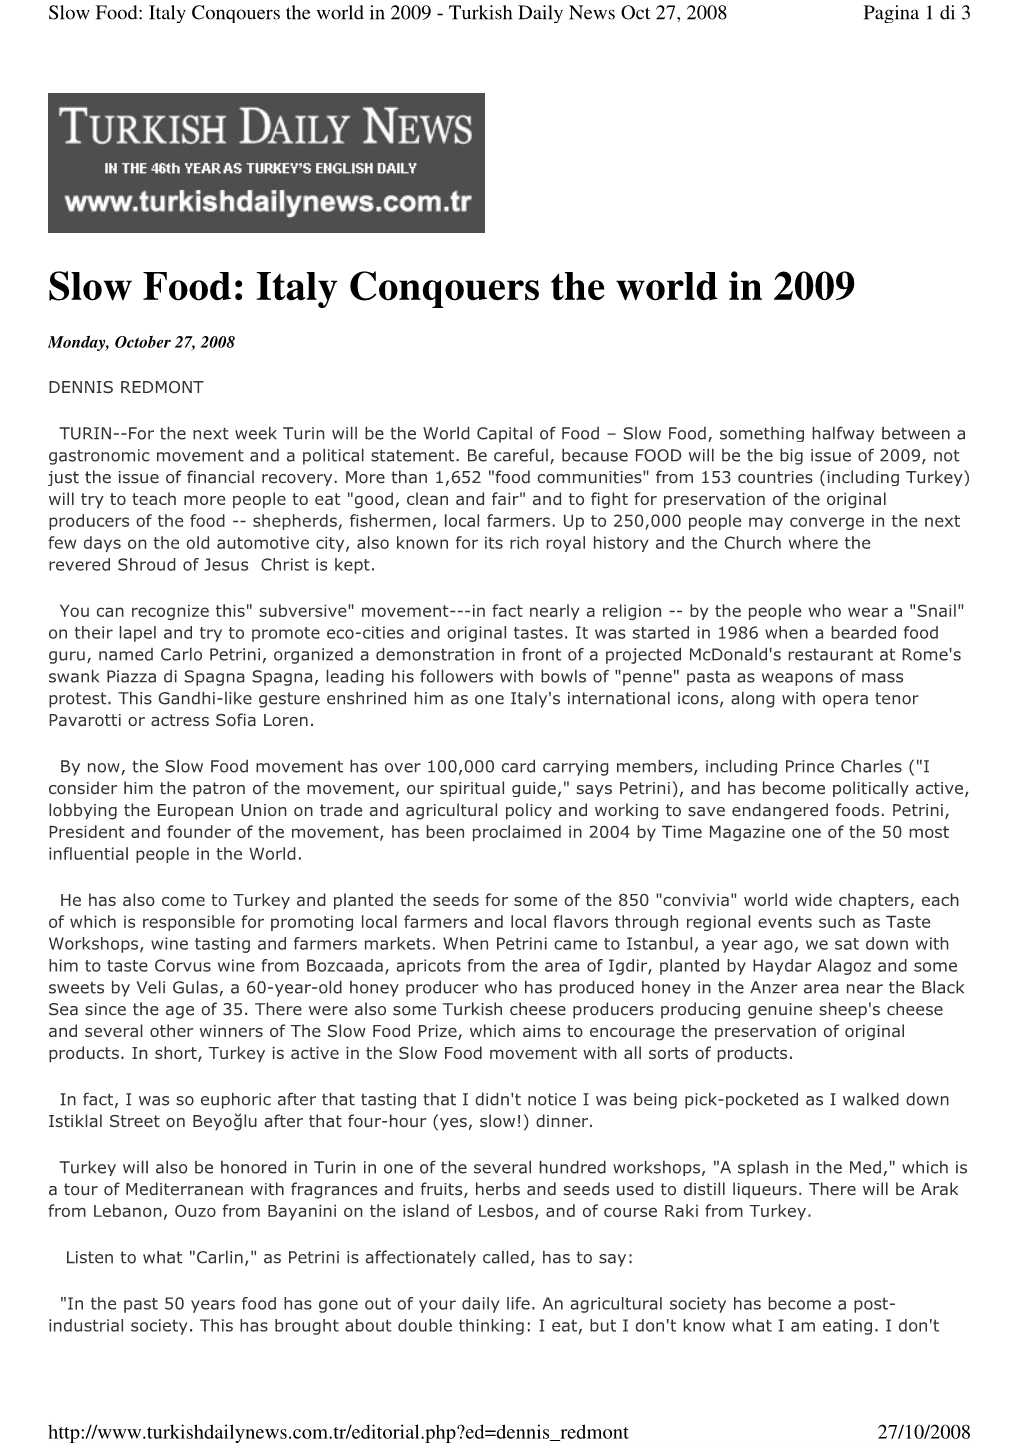 Slow Food: Italy Conqouers the World in 2009 - Turkish Daily News Oct 27, 2008 Pagina 1 Di 3